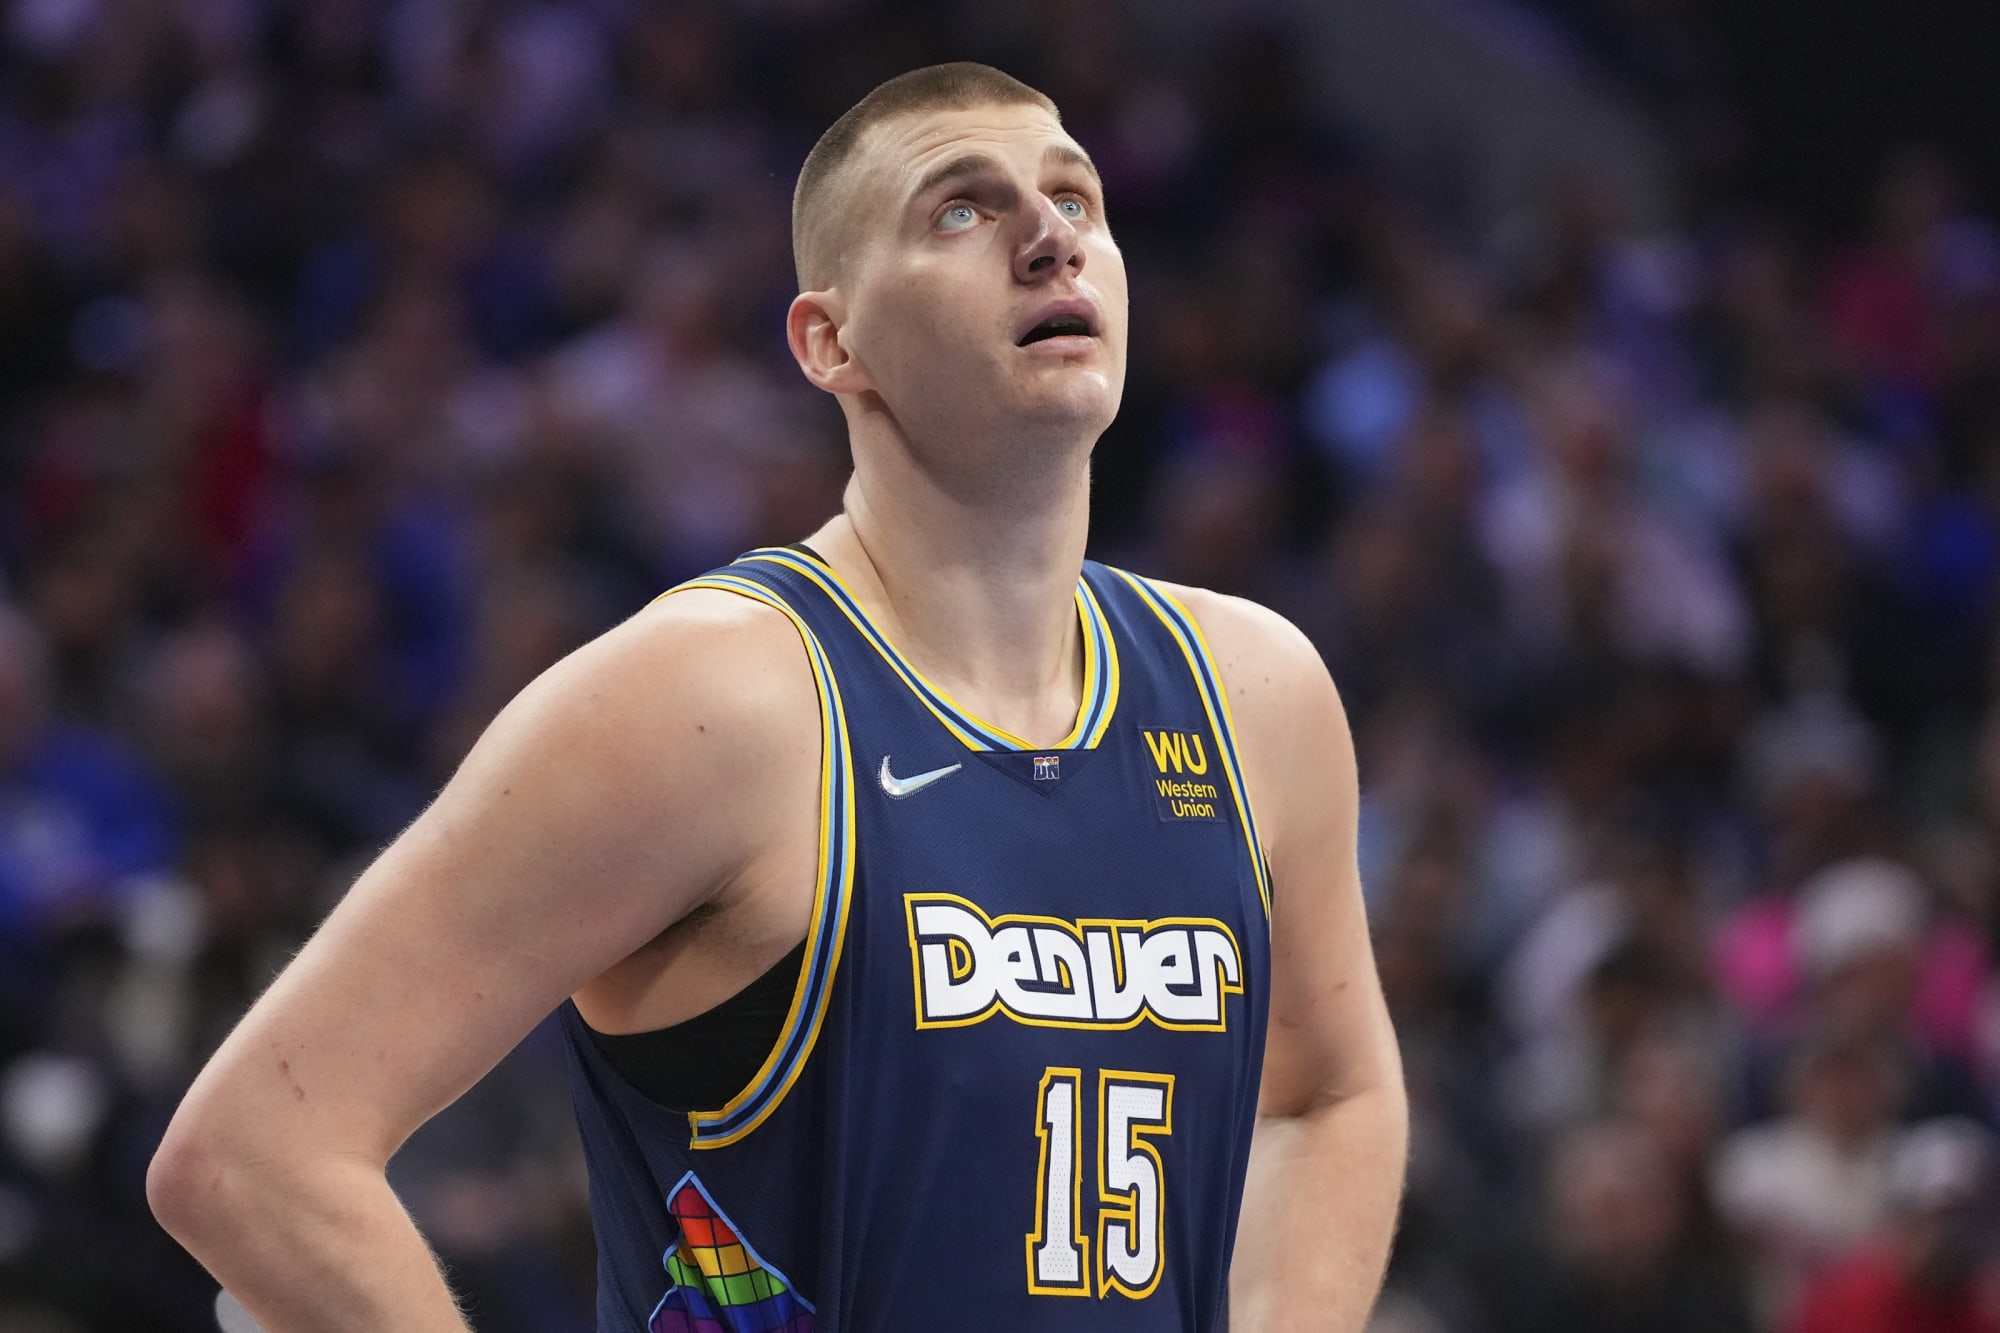 ESPN Stats & Info on X: Nikola Jokic has recorded the 1st 30-pt, 20-reb,  10-ast game in NBA Finals history tonight. It is his 3rd career 30-20-10 playoff  game of any kind.